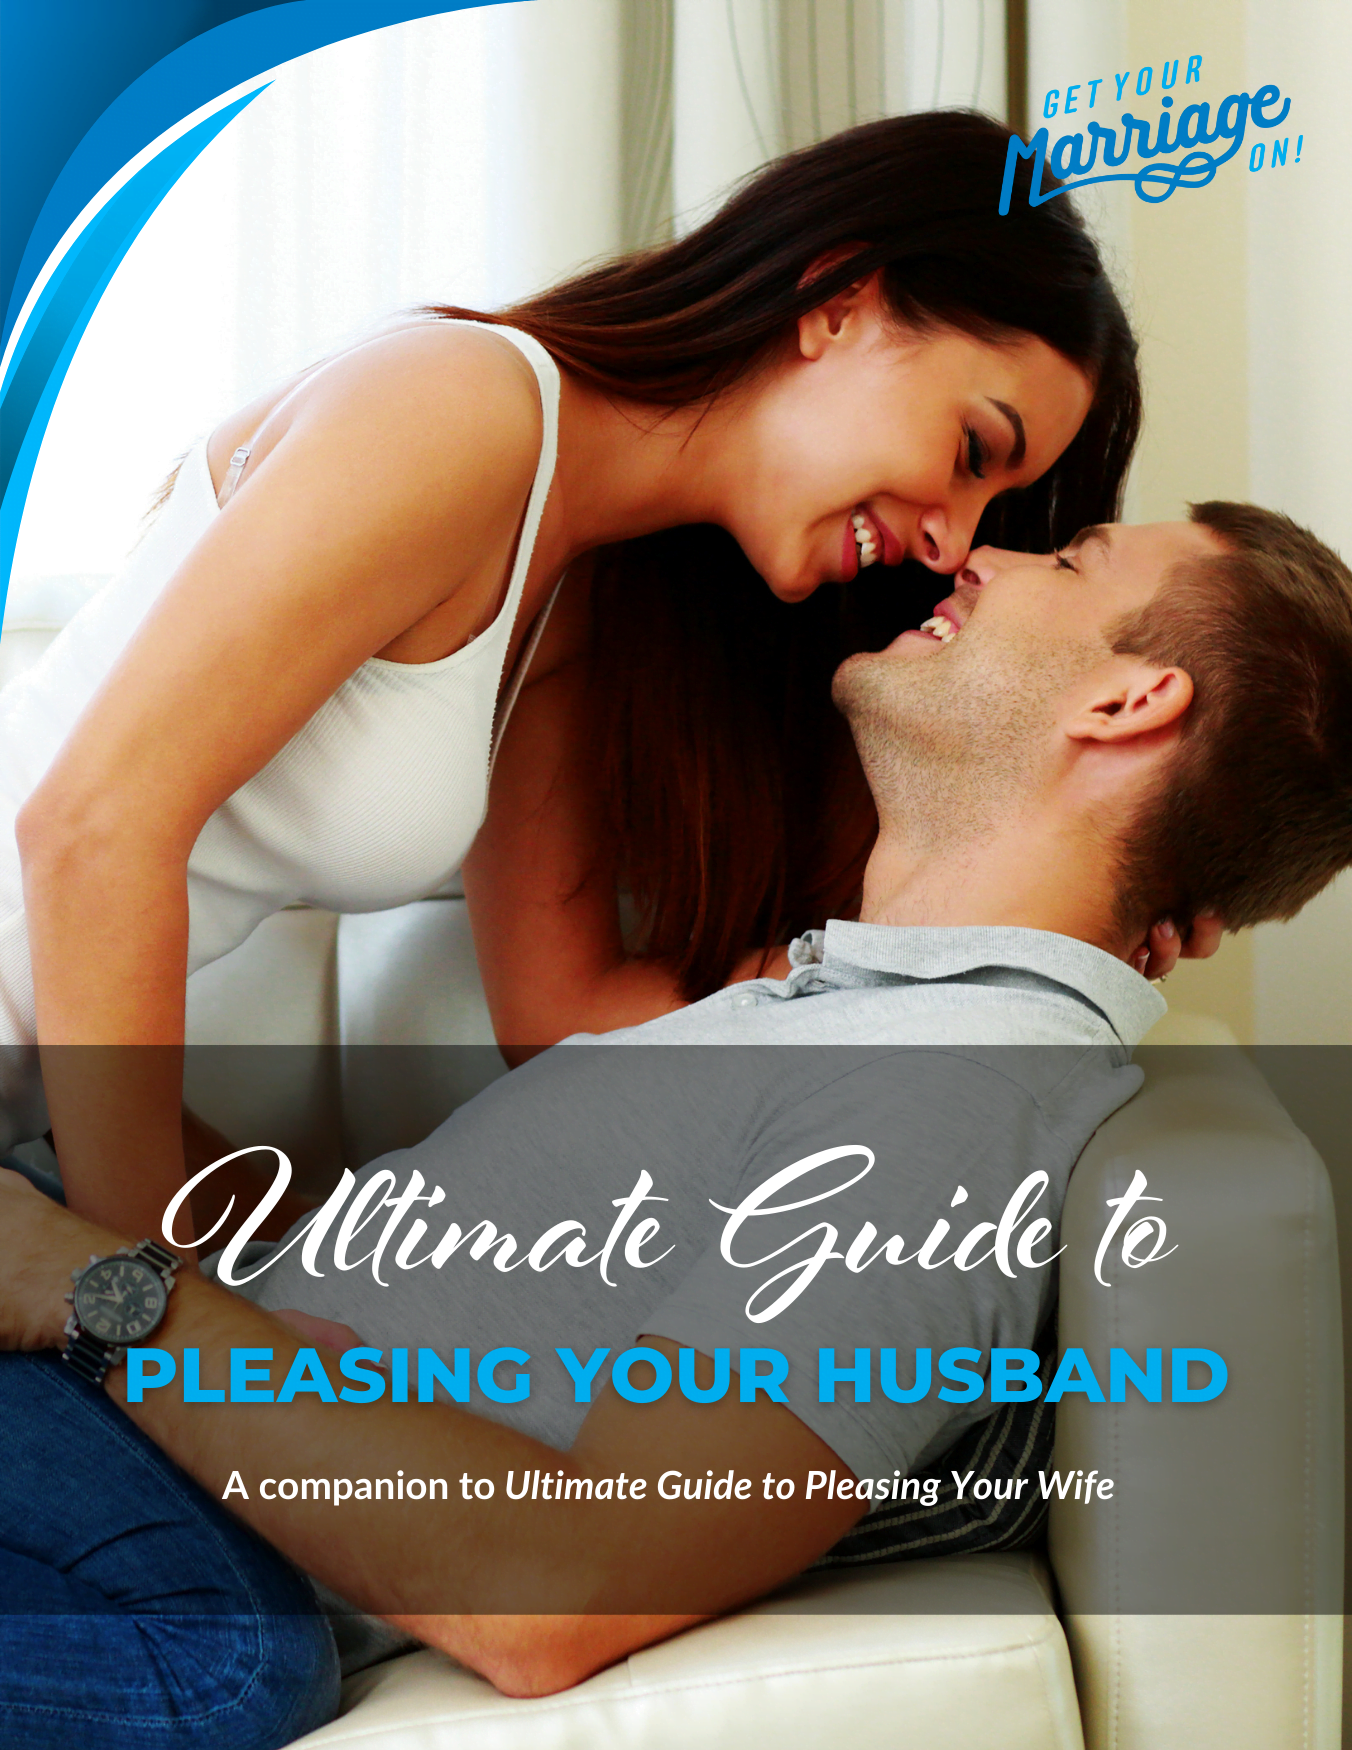 Ultimate Guide to Pleasing Your Husband